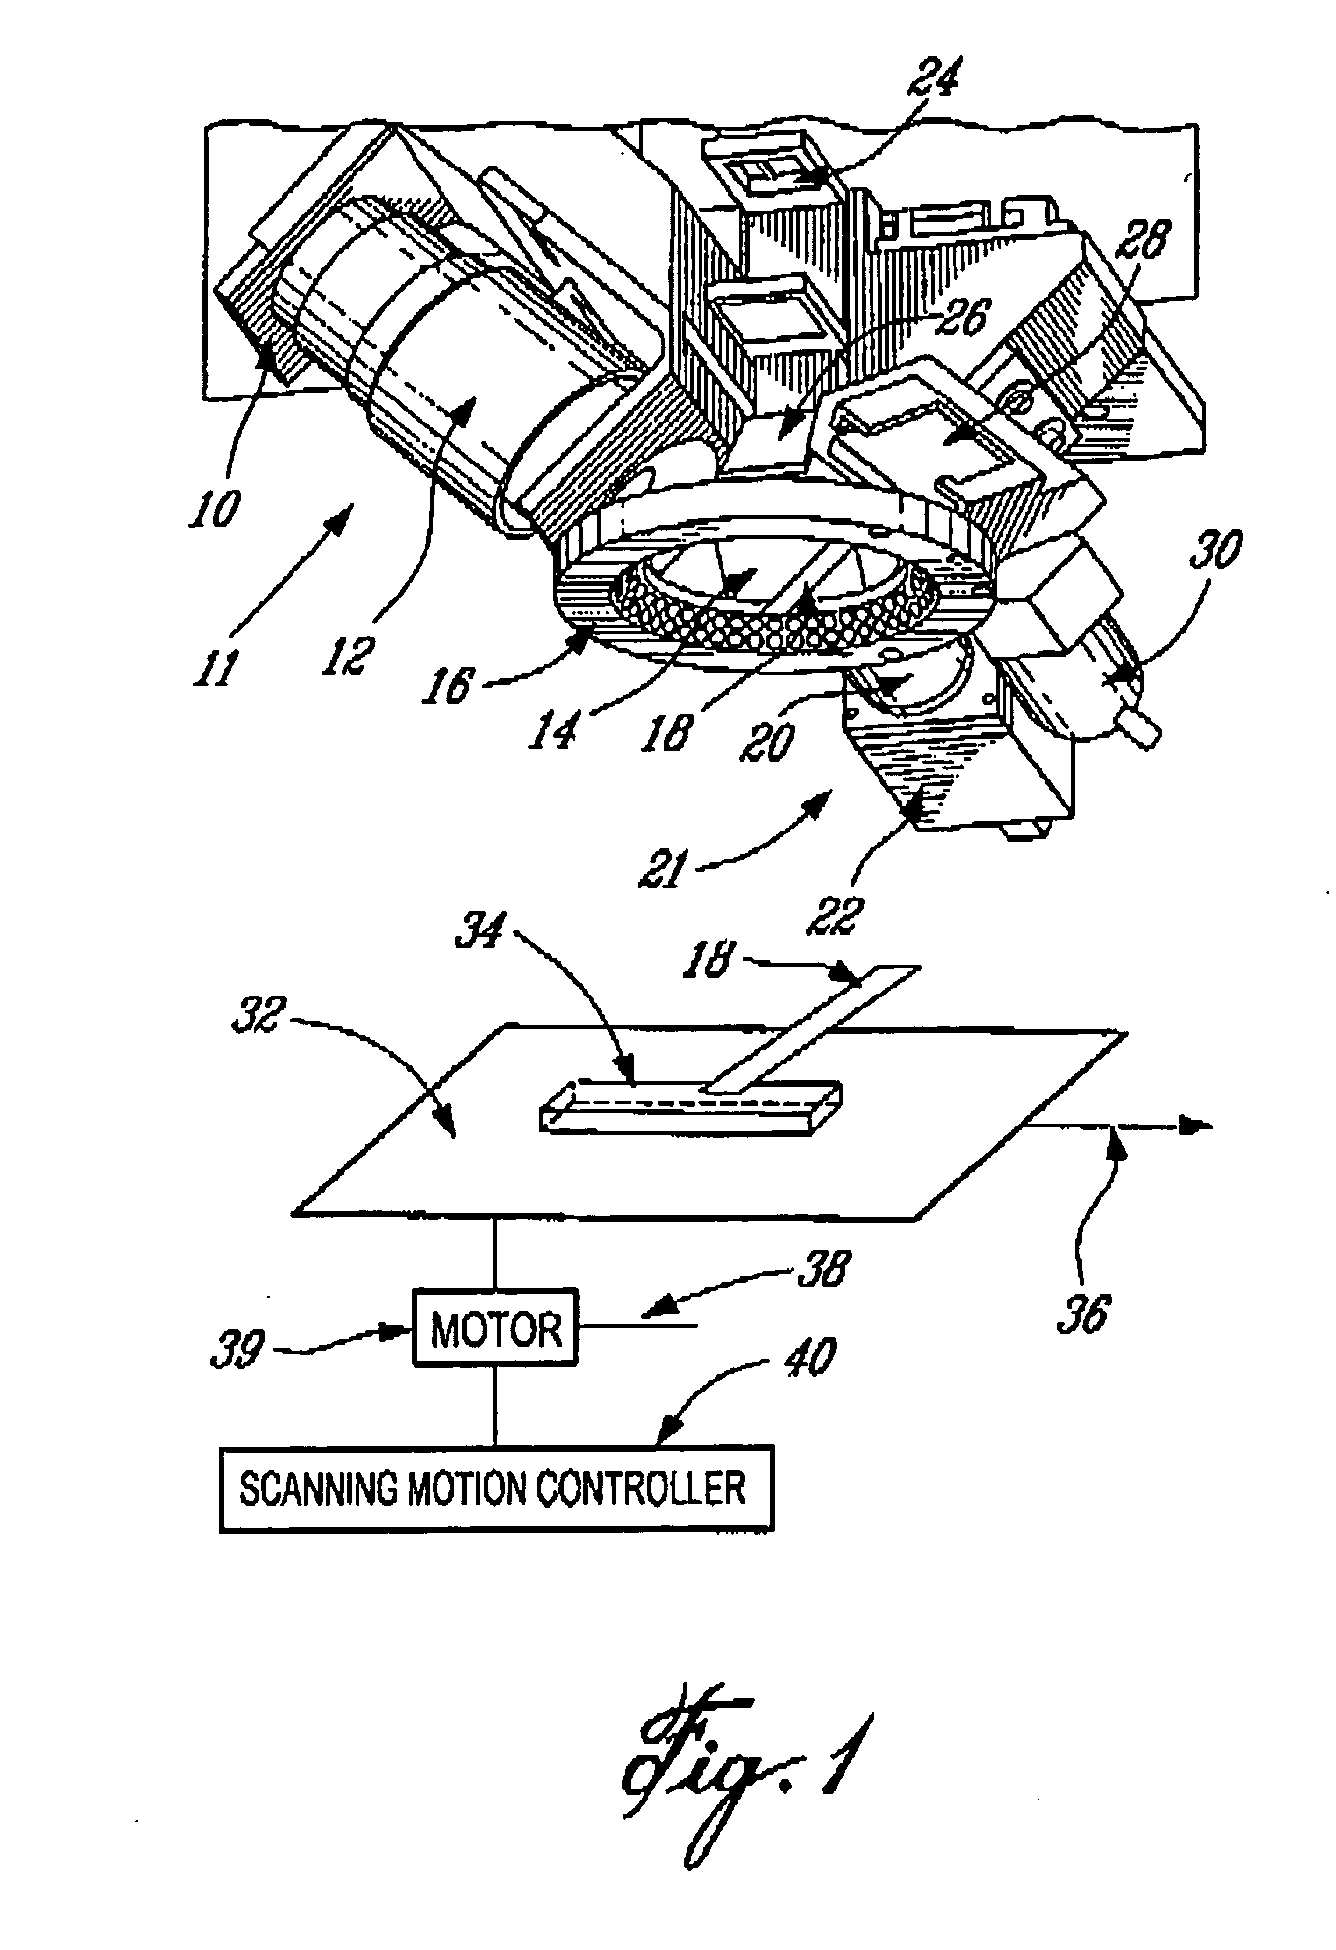 Method and an apparatus for simultaneous 2D and 3D optical inspection and acquisition of optical inspection data of an object